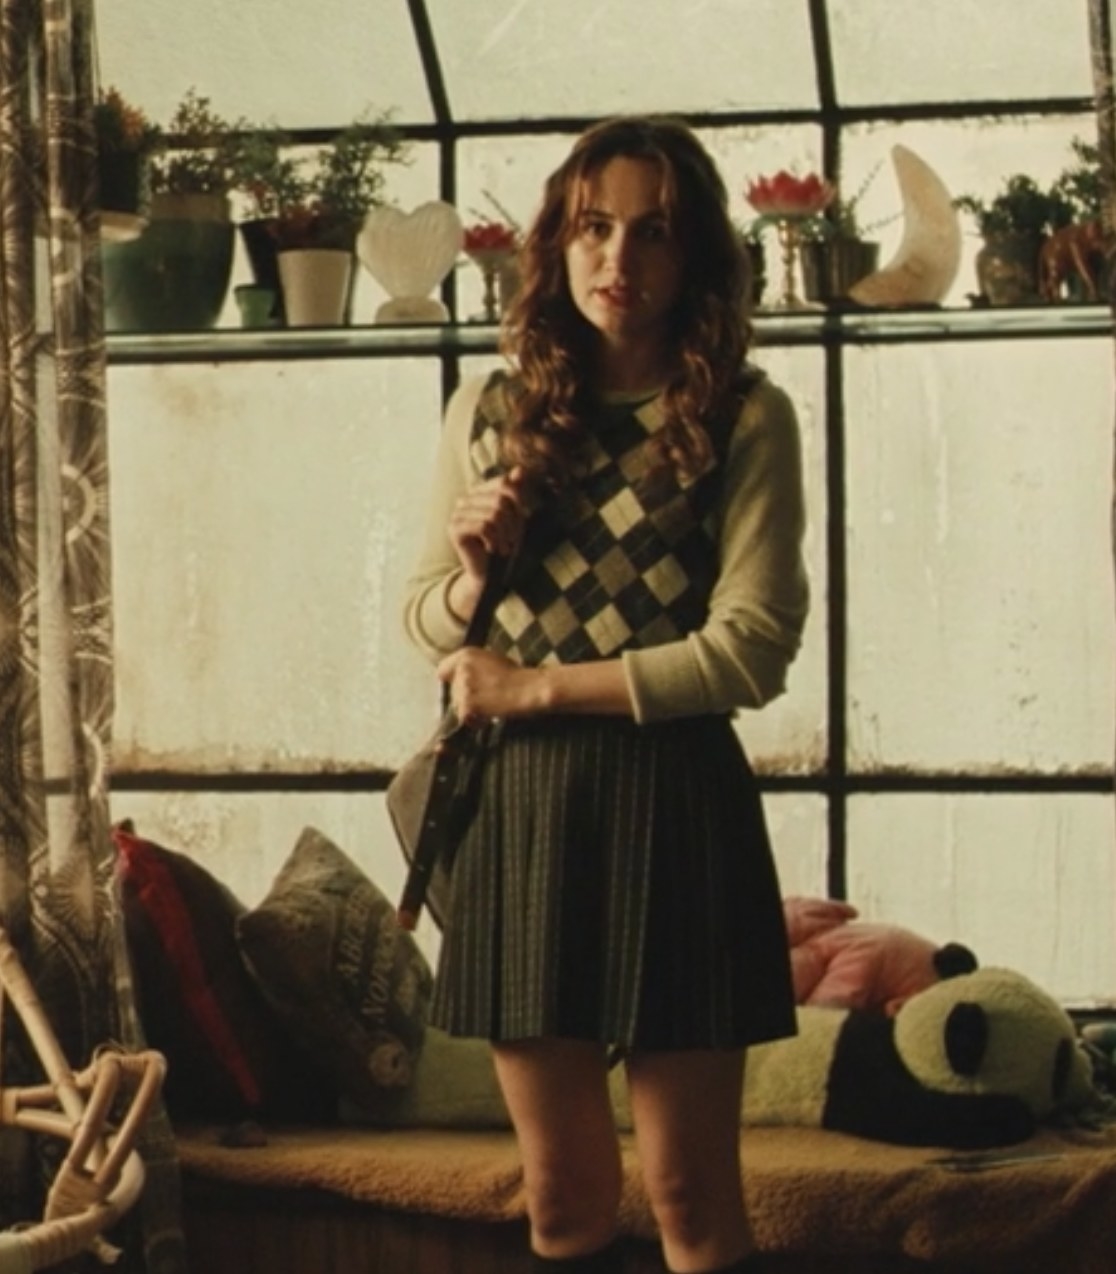 Lexi talks to Rue and wears a pleated skirt and argyle sweater